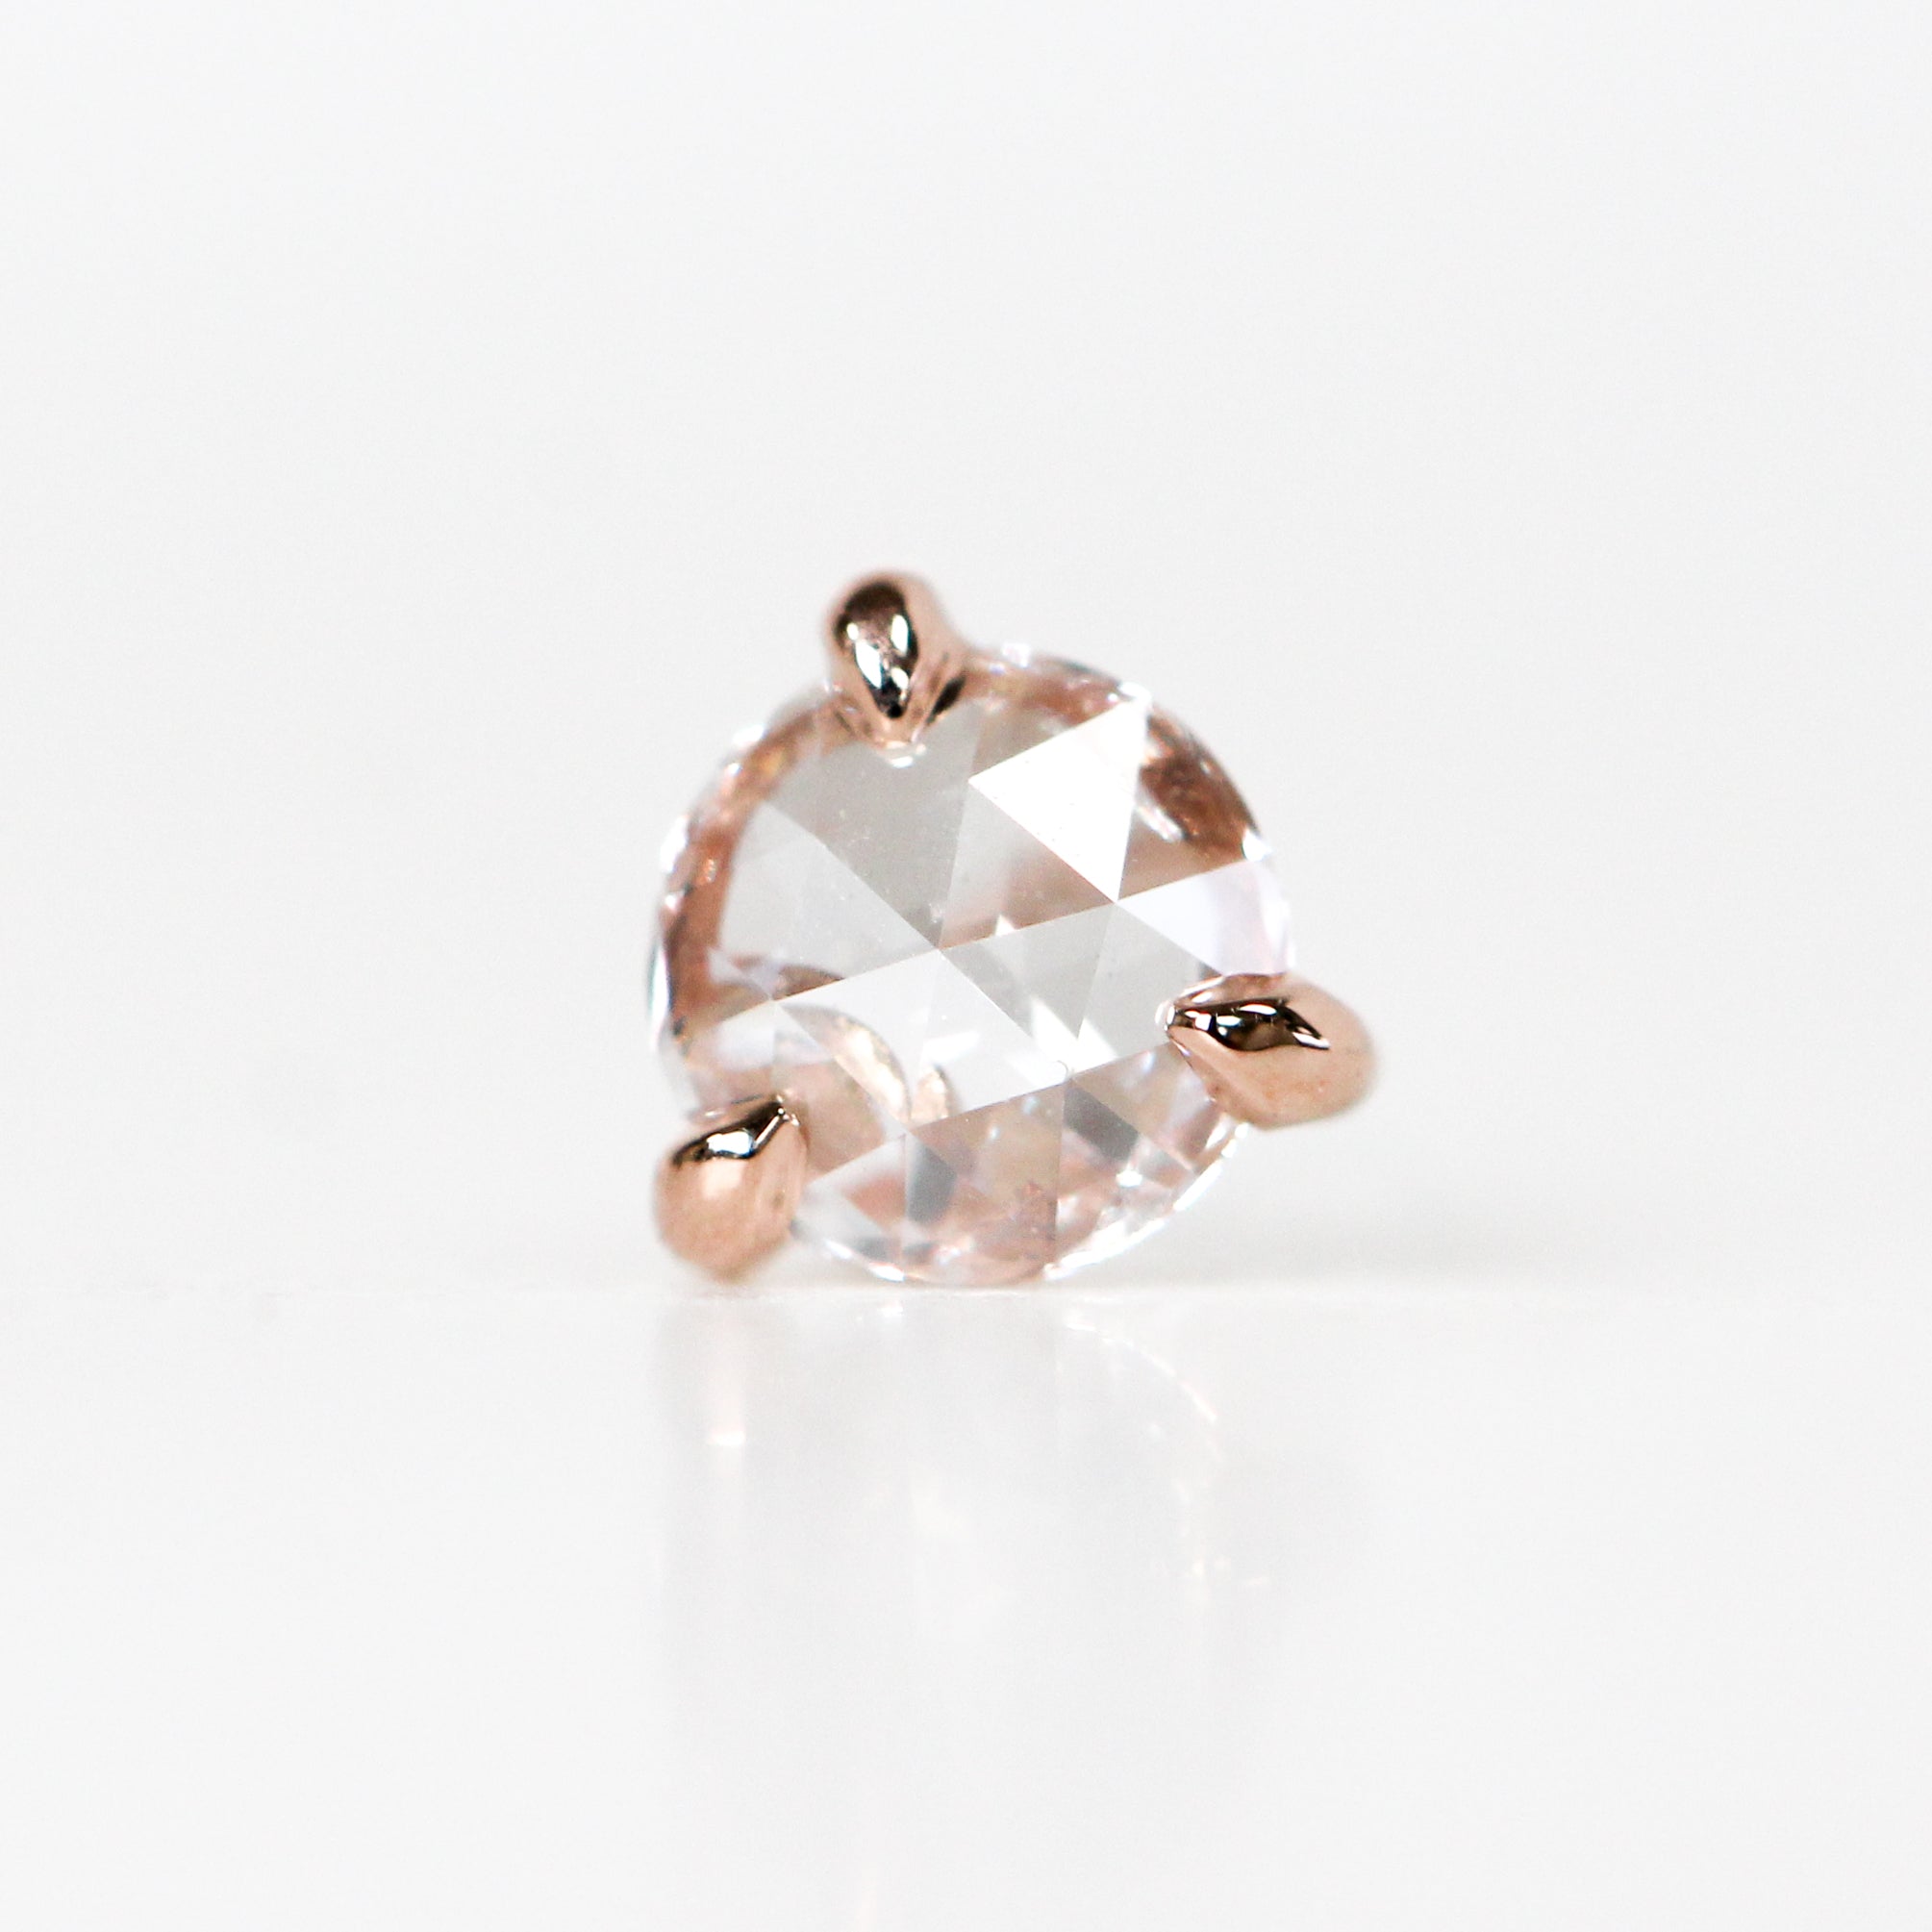 Rose Cut Diamond 0.25 ct. Earring Studs in 14k gold of your choice - Made  to Order